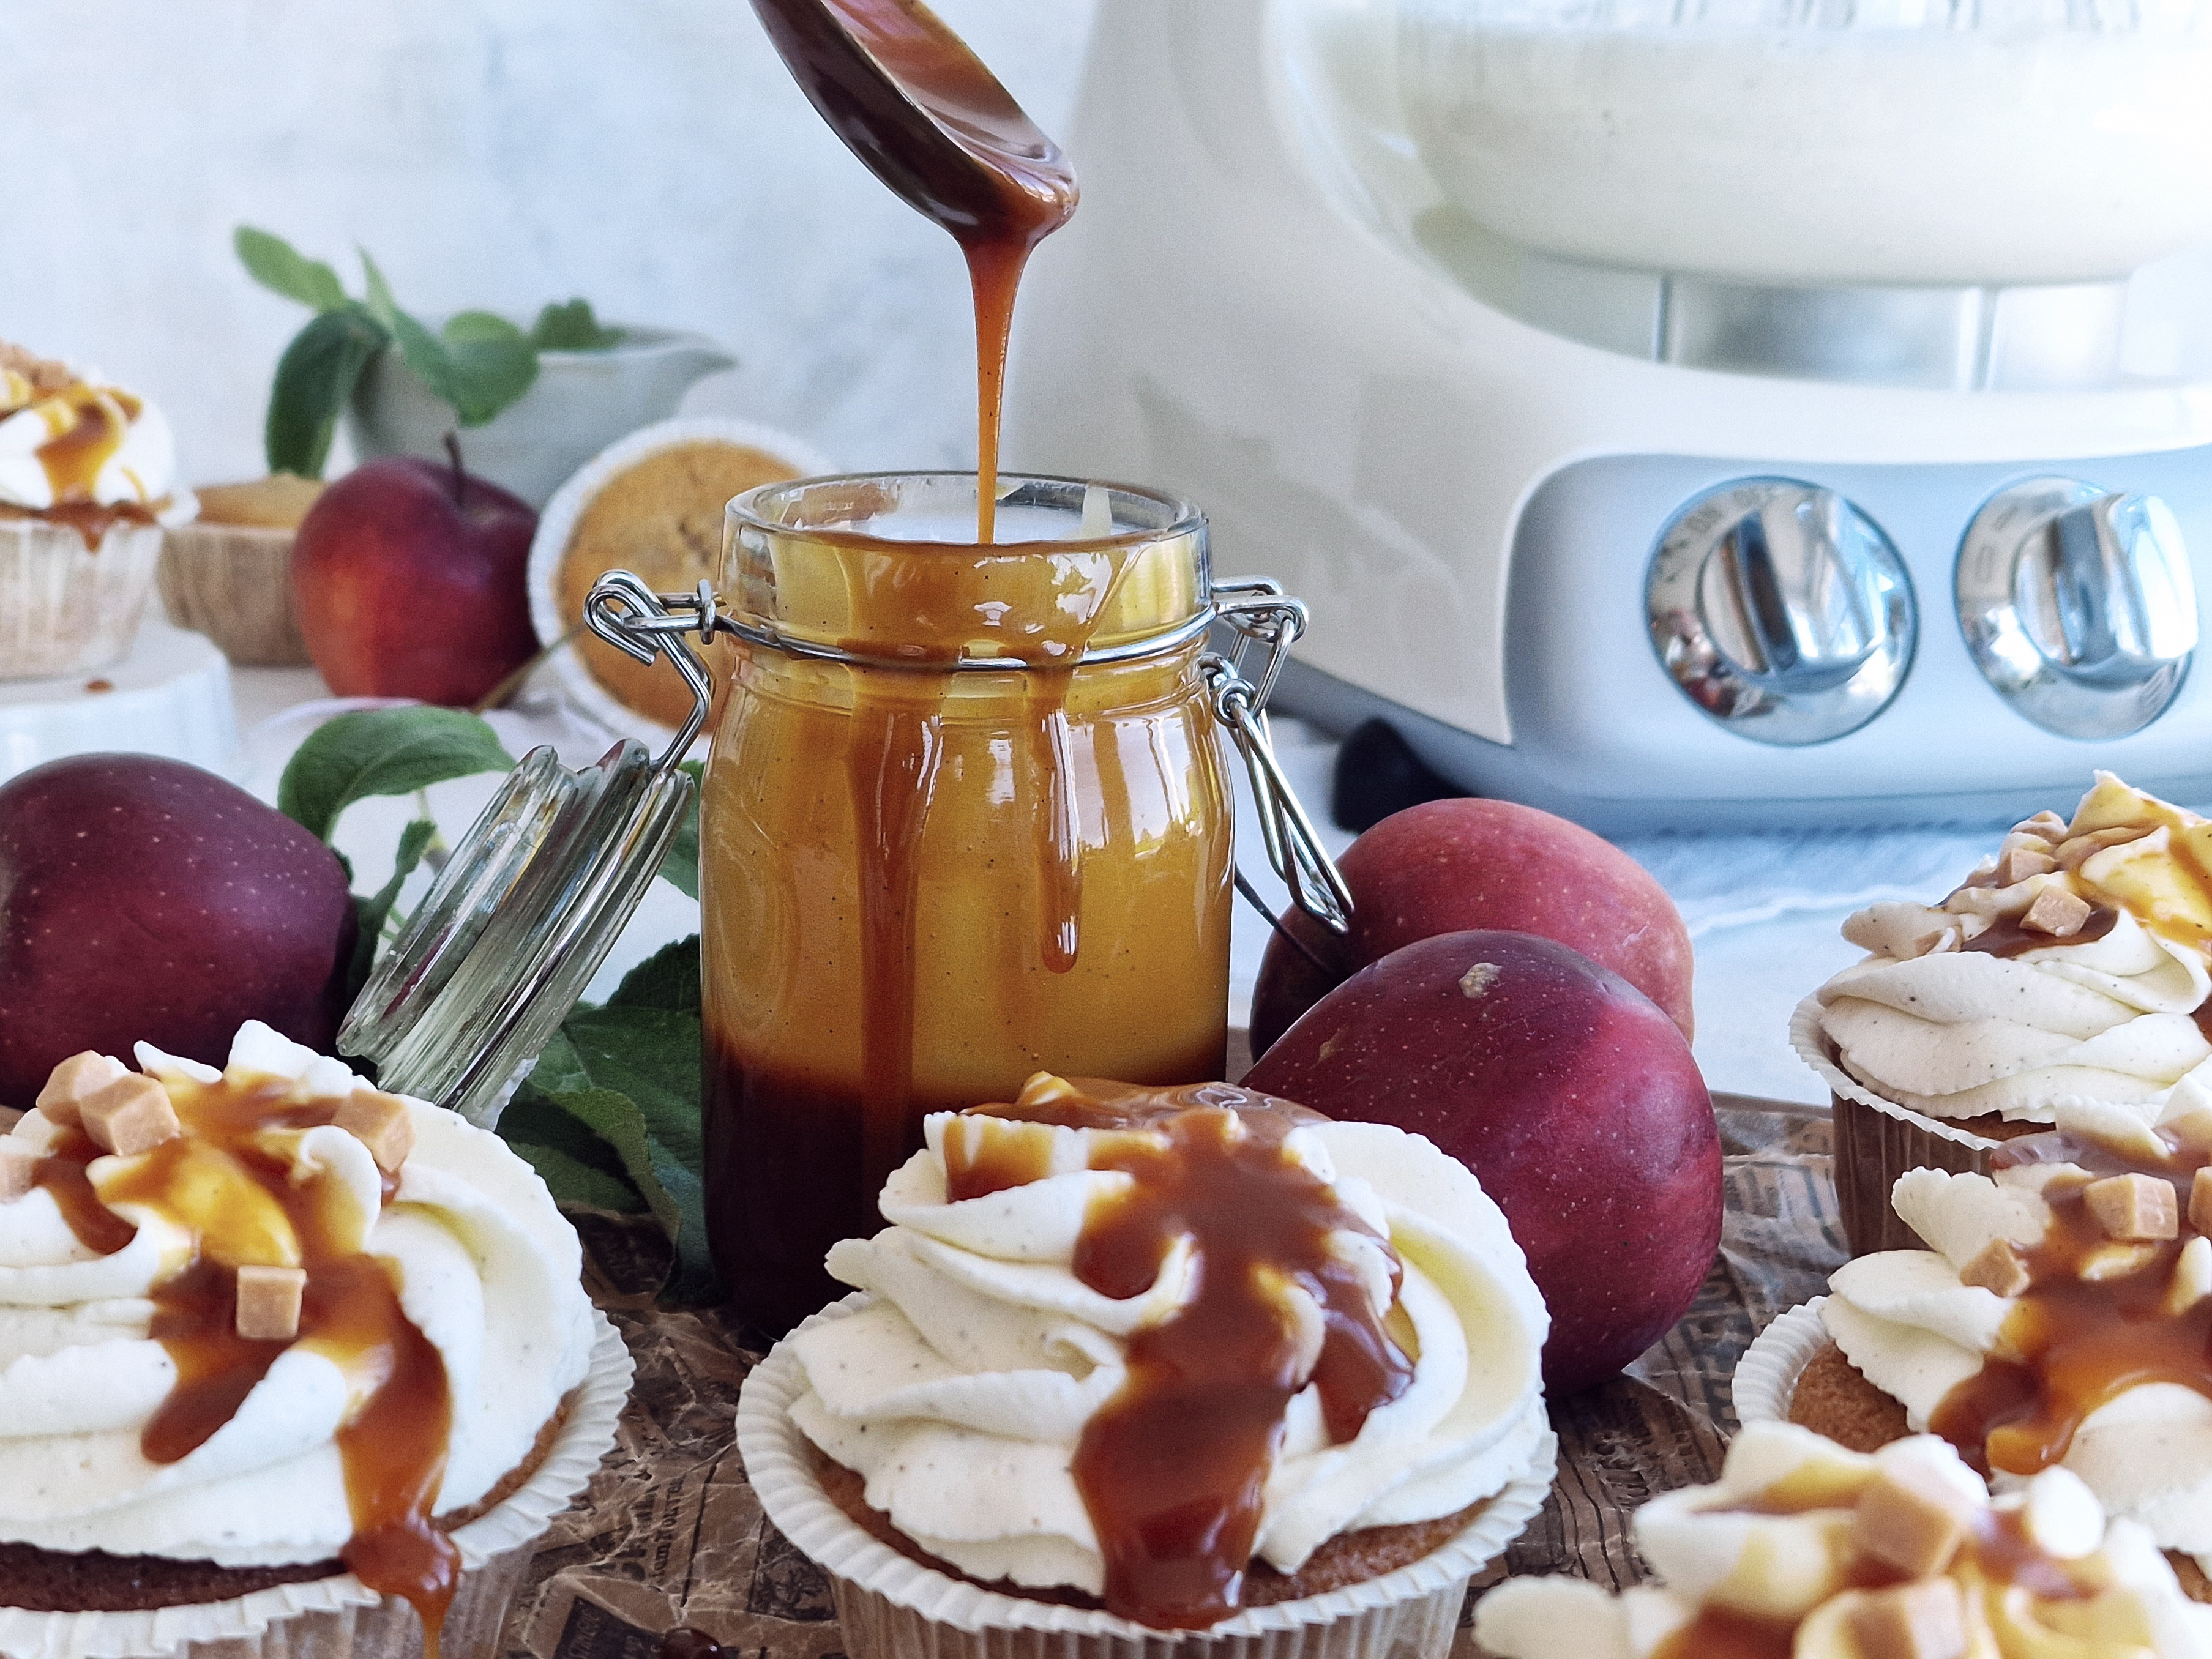 Apple cupcake with salted caramel topping